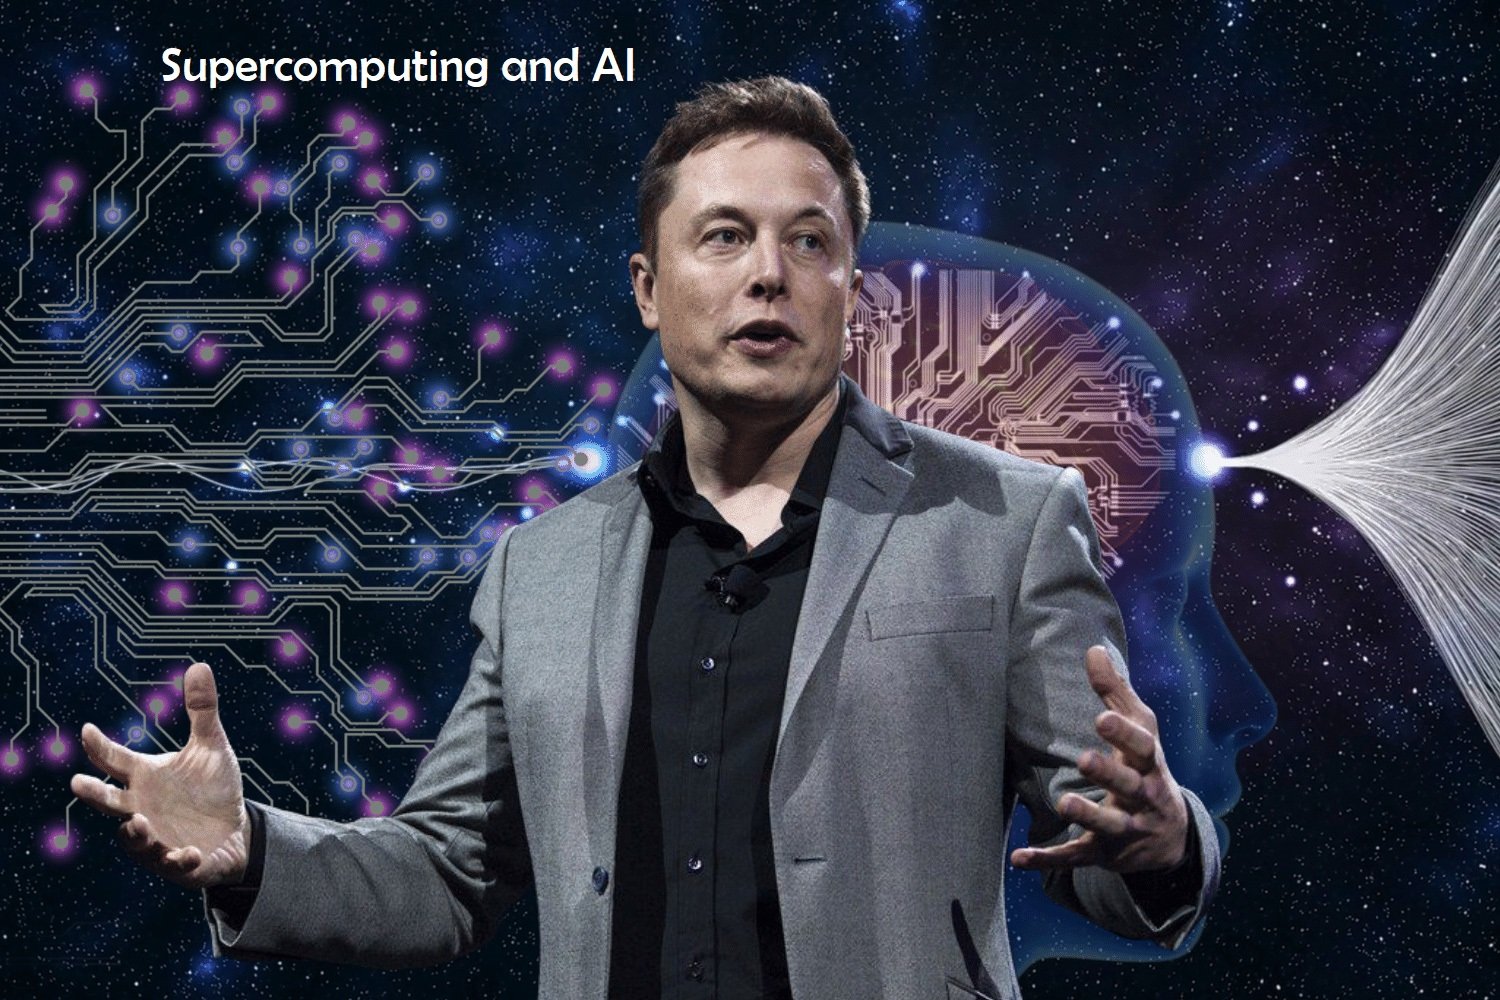 Elon Musk's Ambitious Investments in Supercomputing and AI